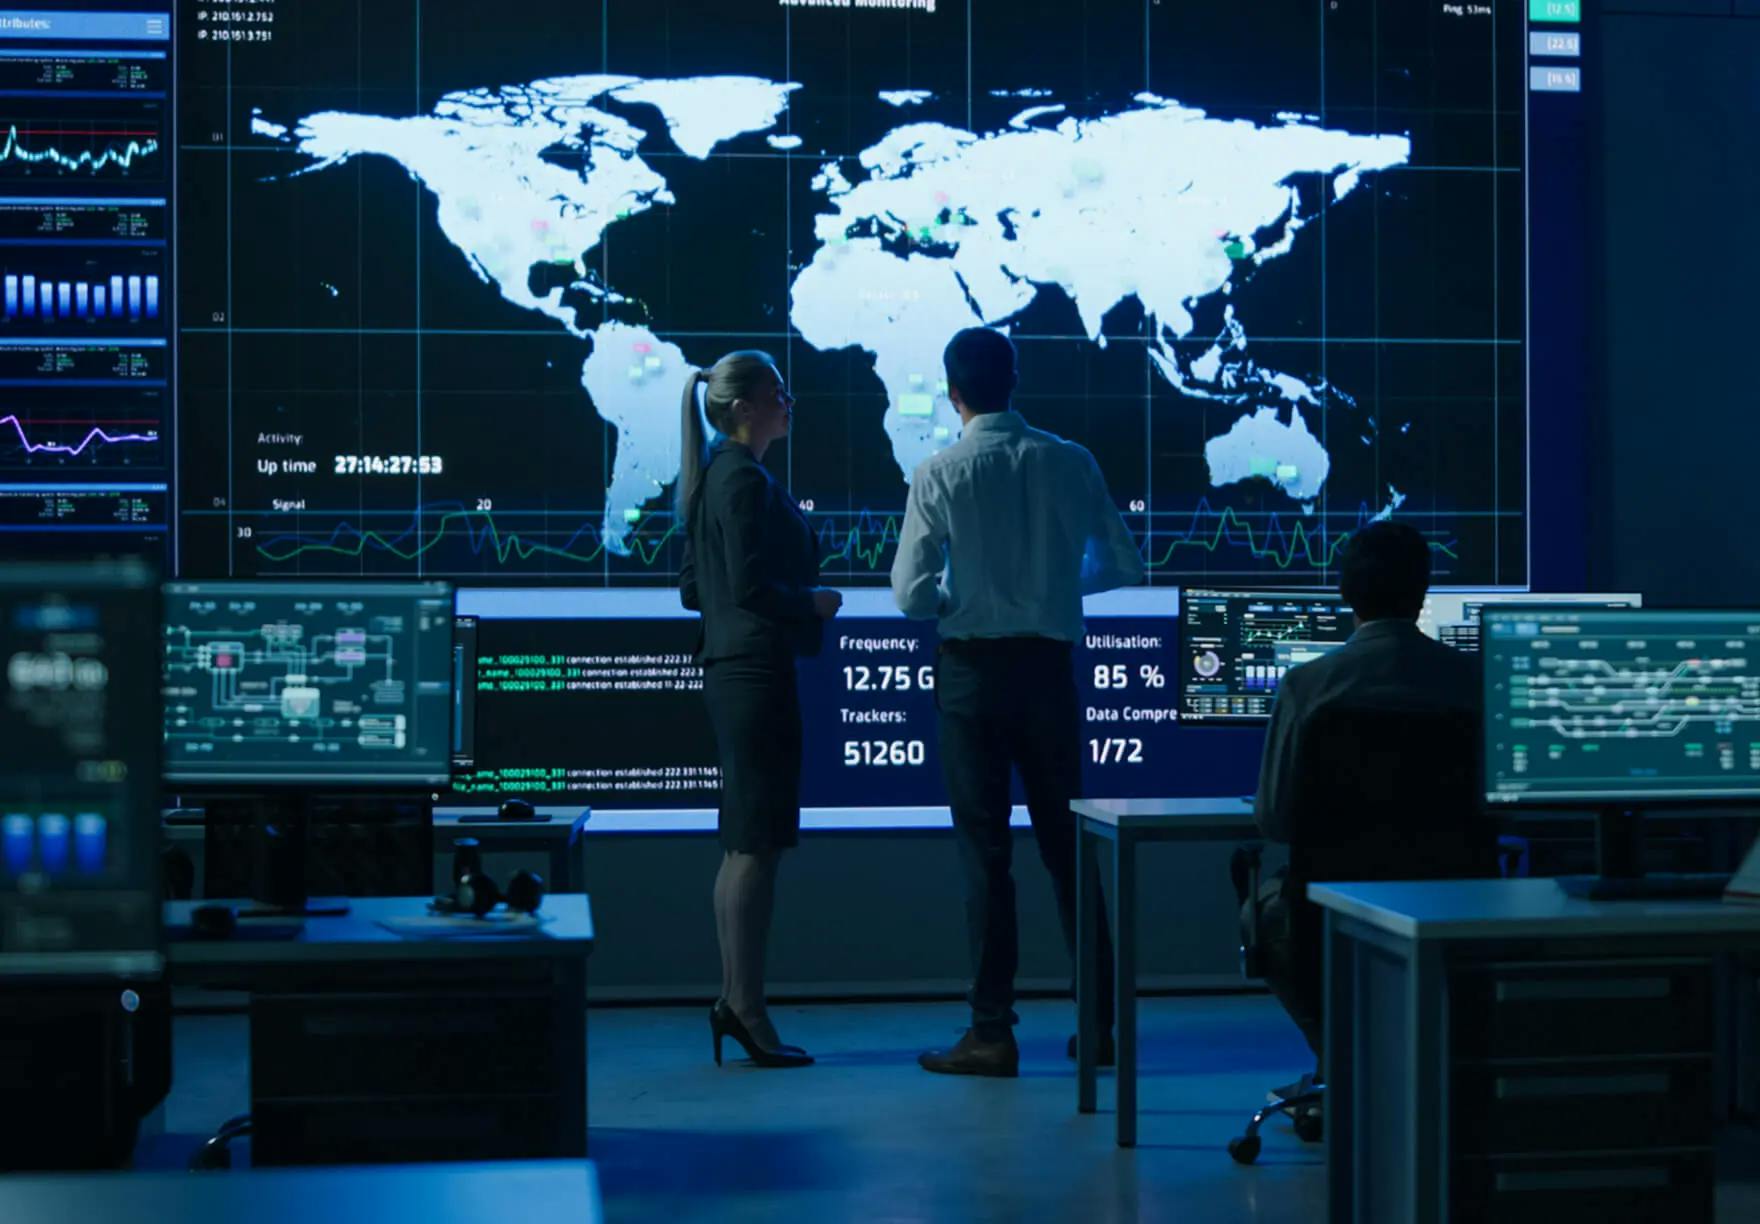 Two workers looking at a large projected computer screen of a world map